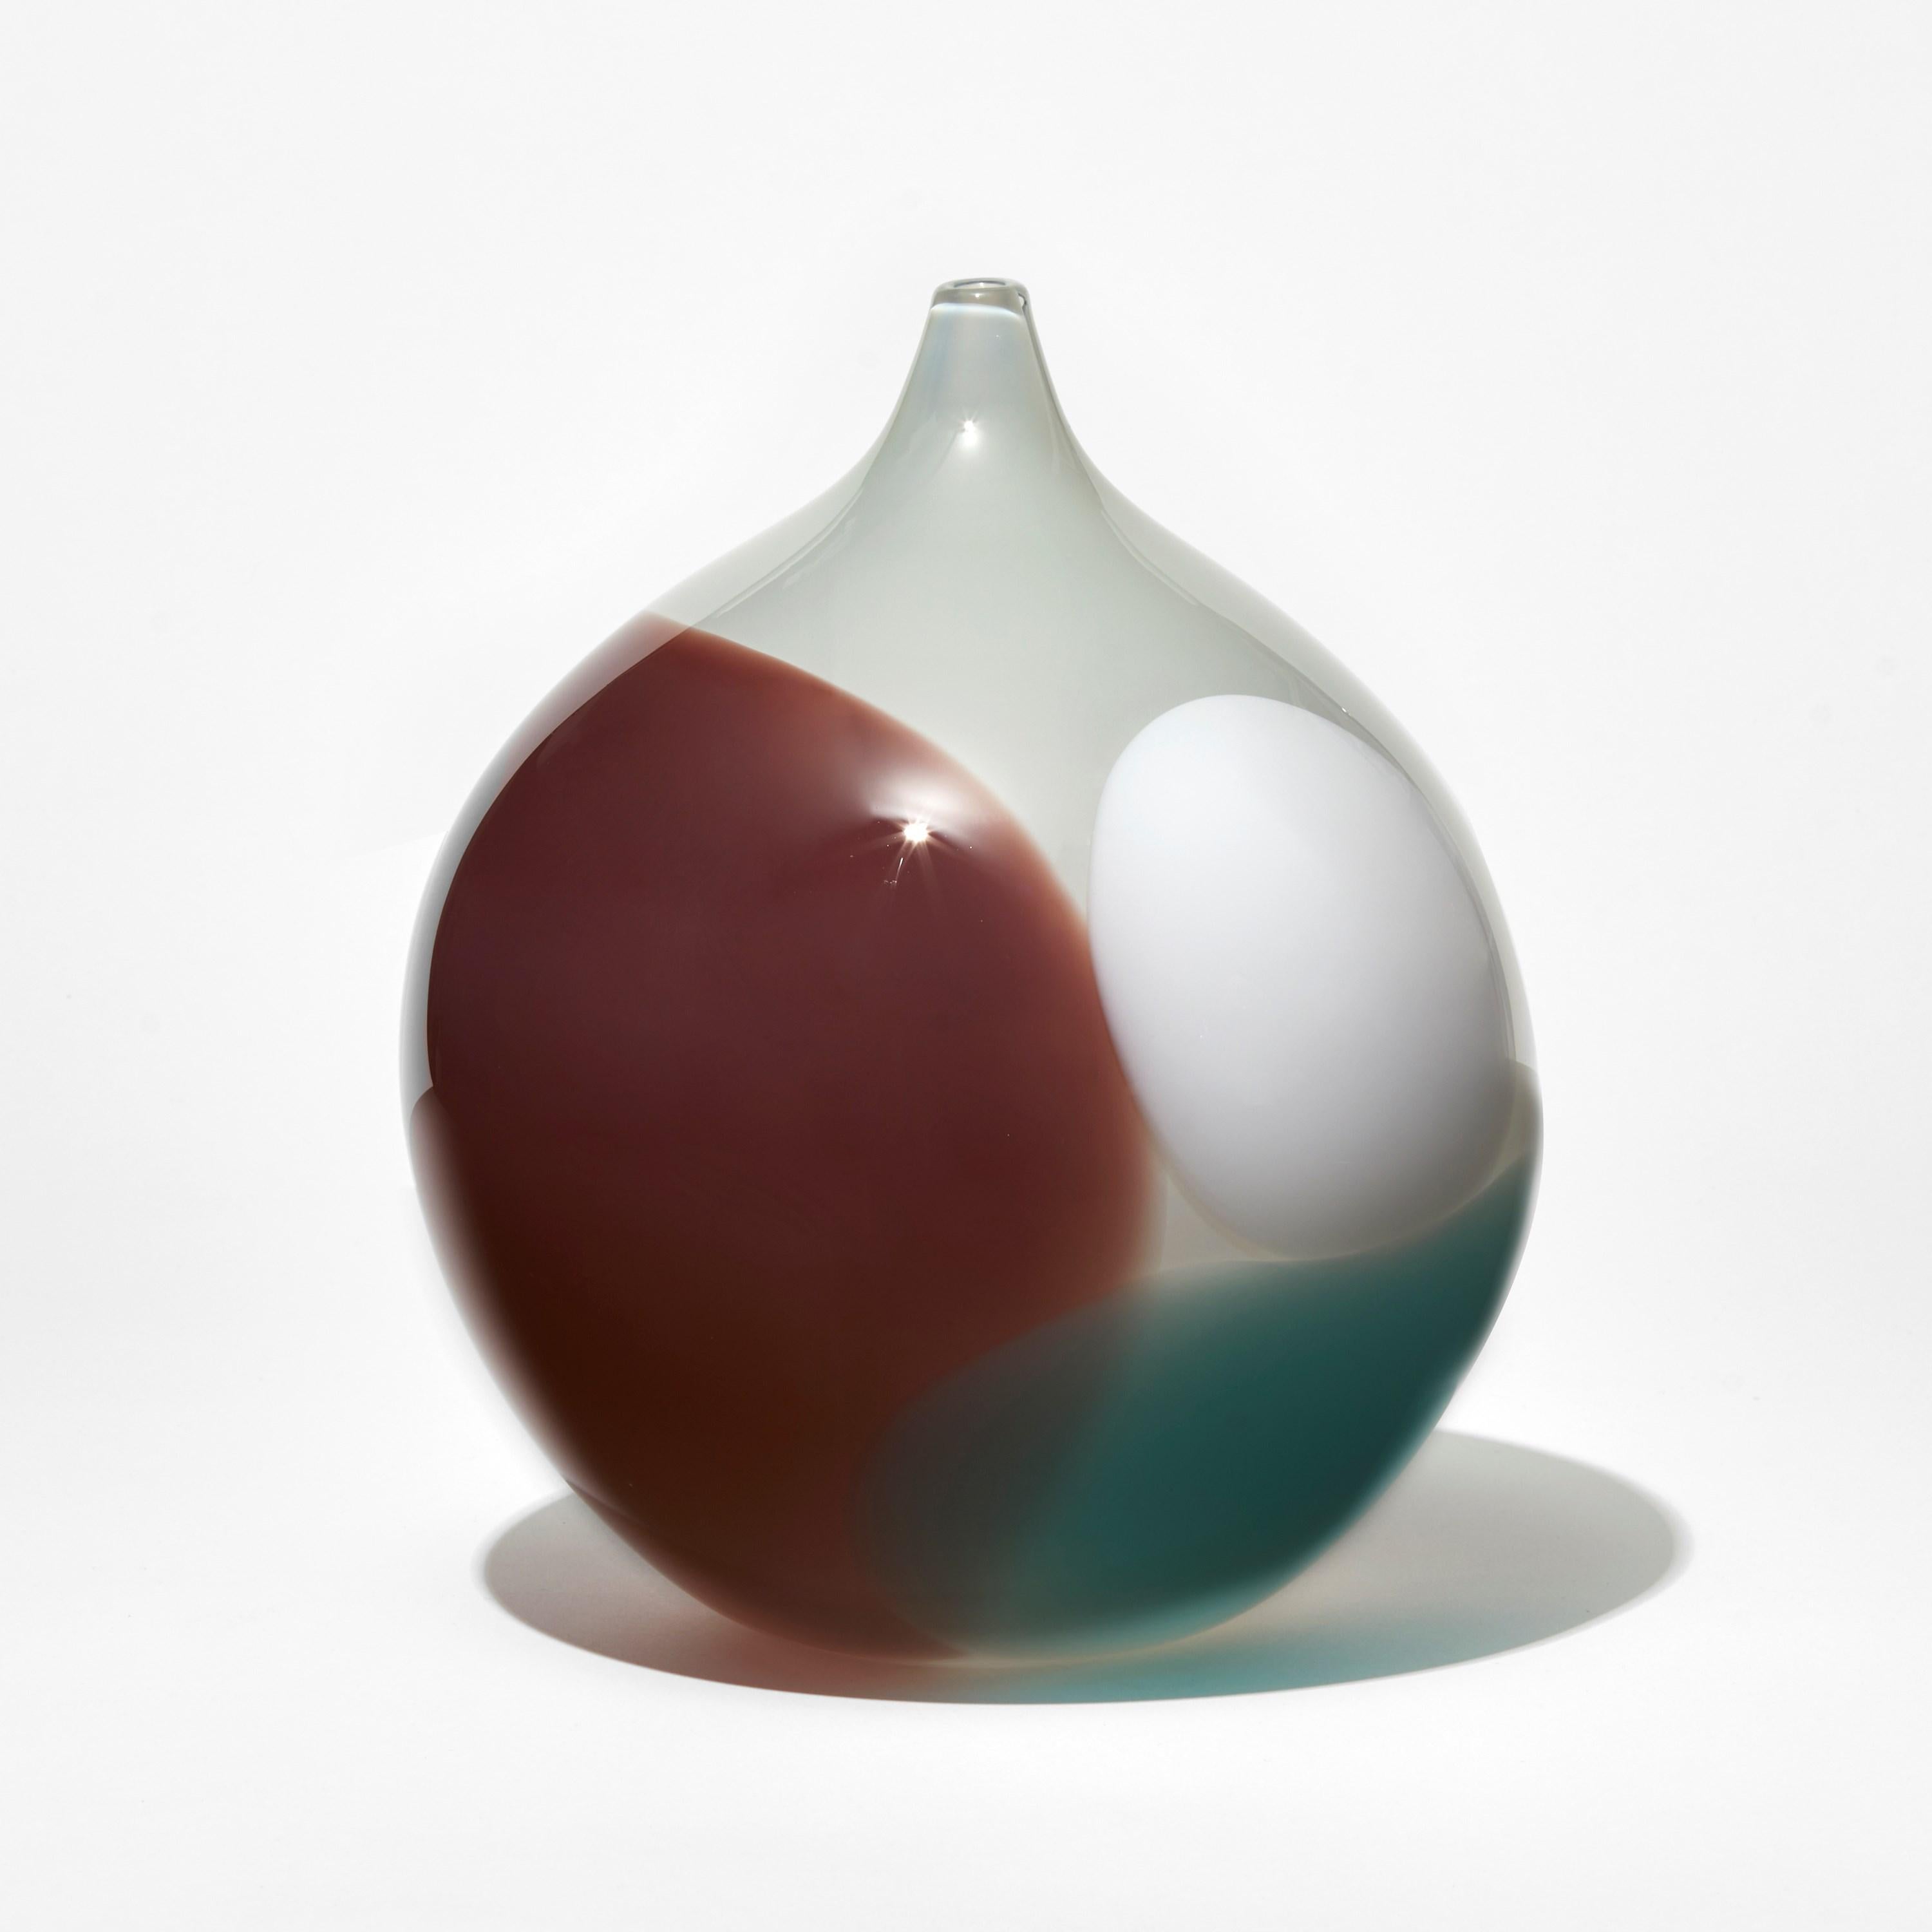 ''Dracocephalum White'' is a unique glass sculptural vessel by the Swedish artist, Gunnel Sahlin.

Sahlin’s current passions include exploring the limits of glass materiality, colour, form and light taking her inspiration from the natural world